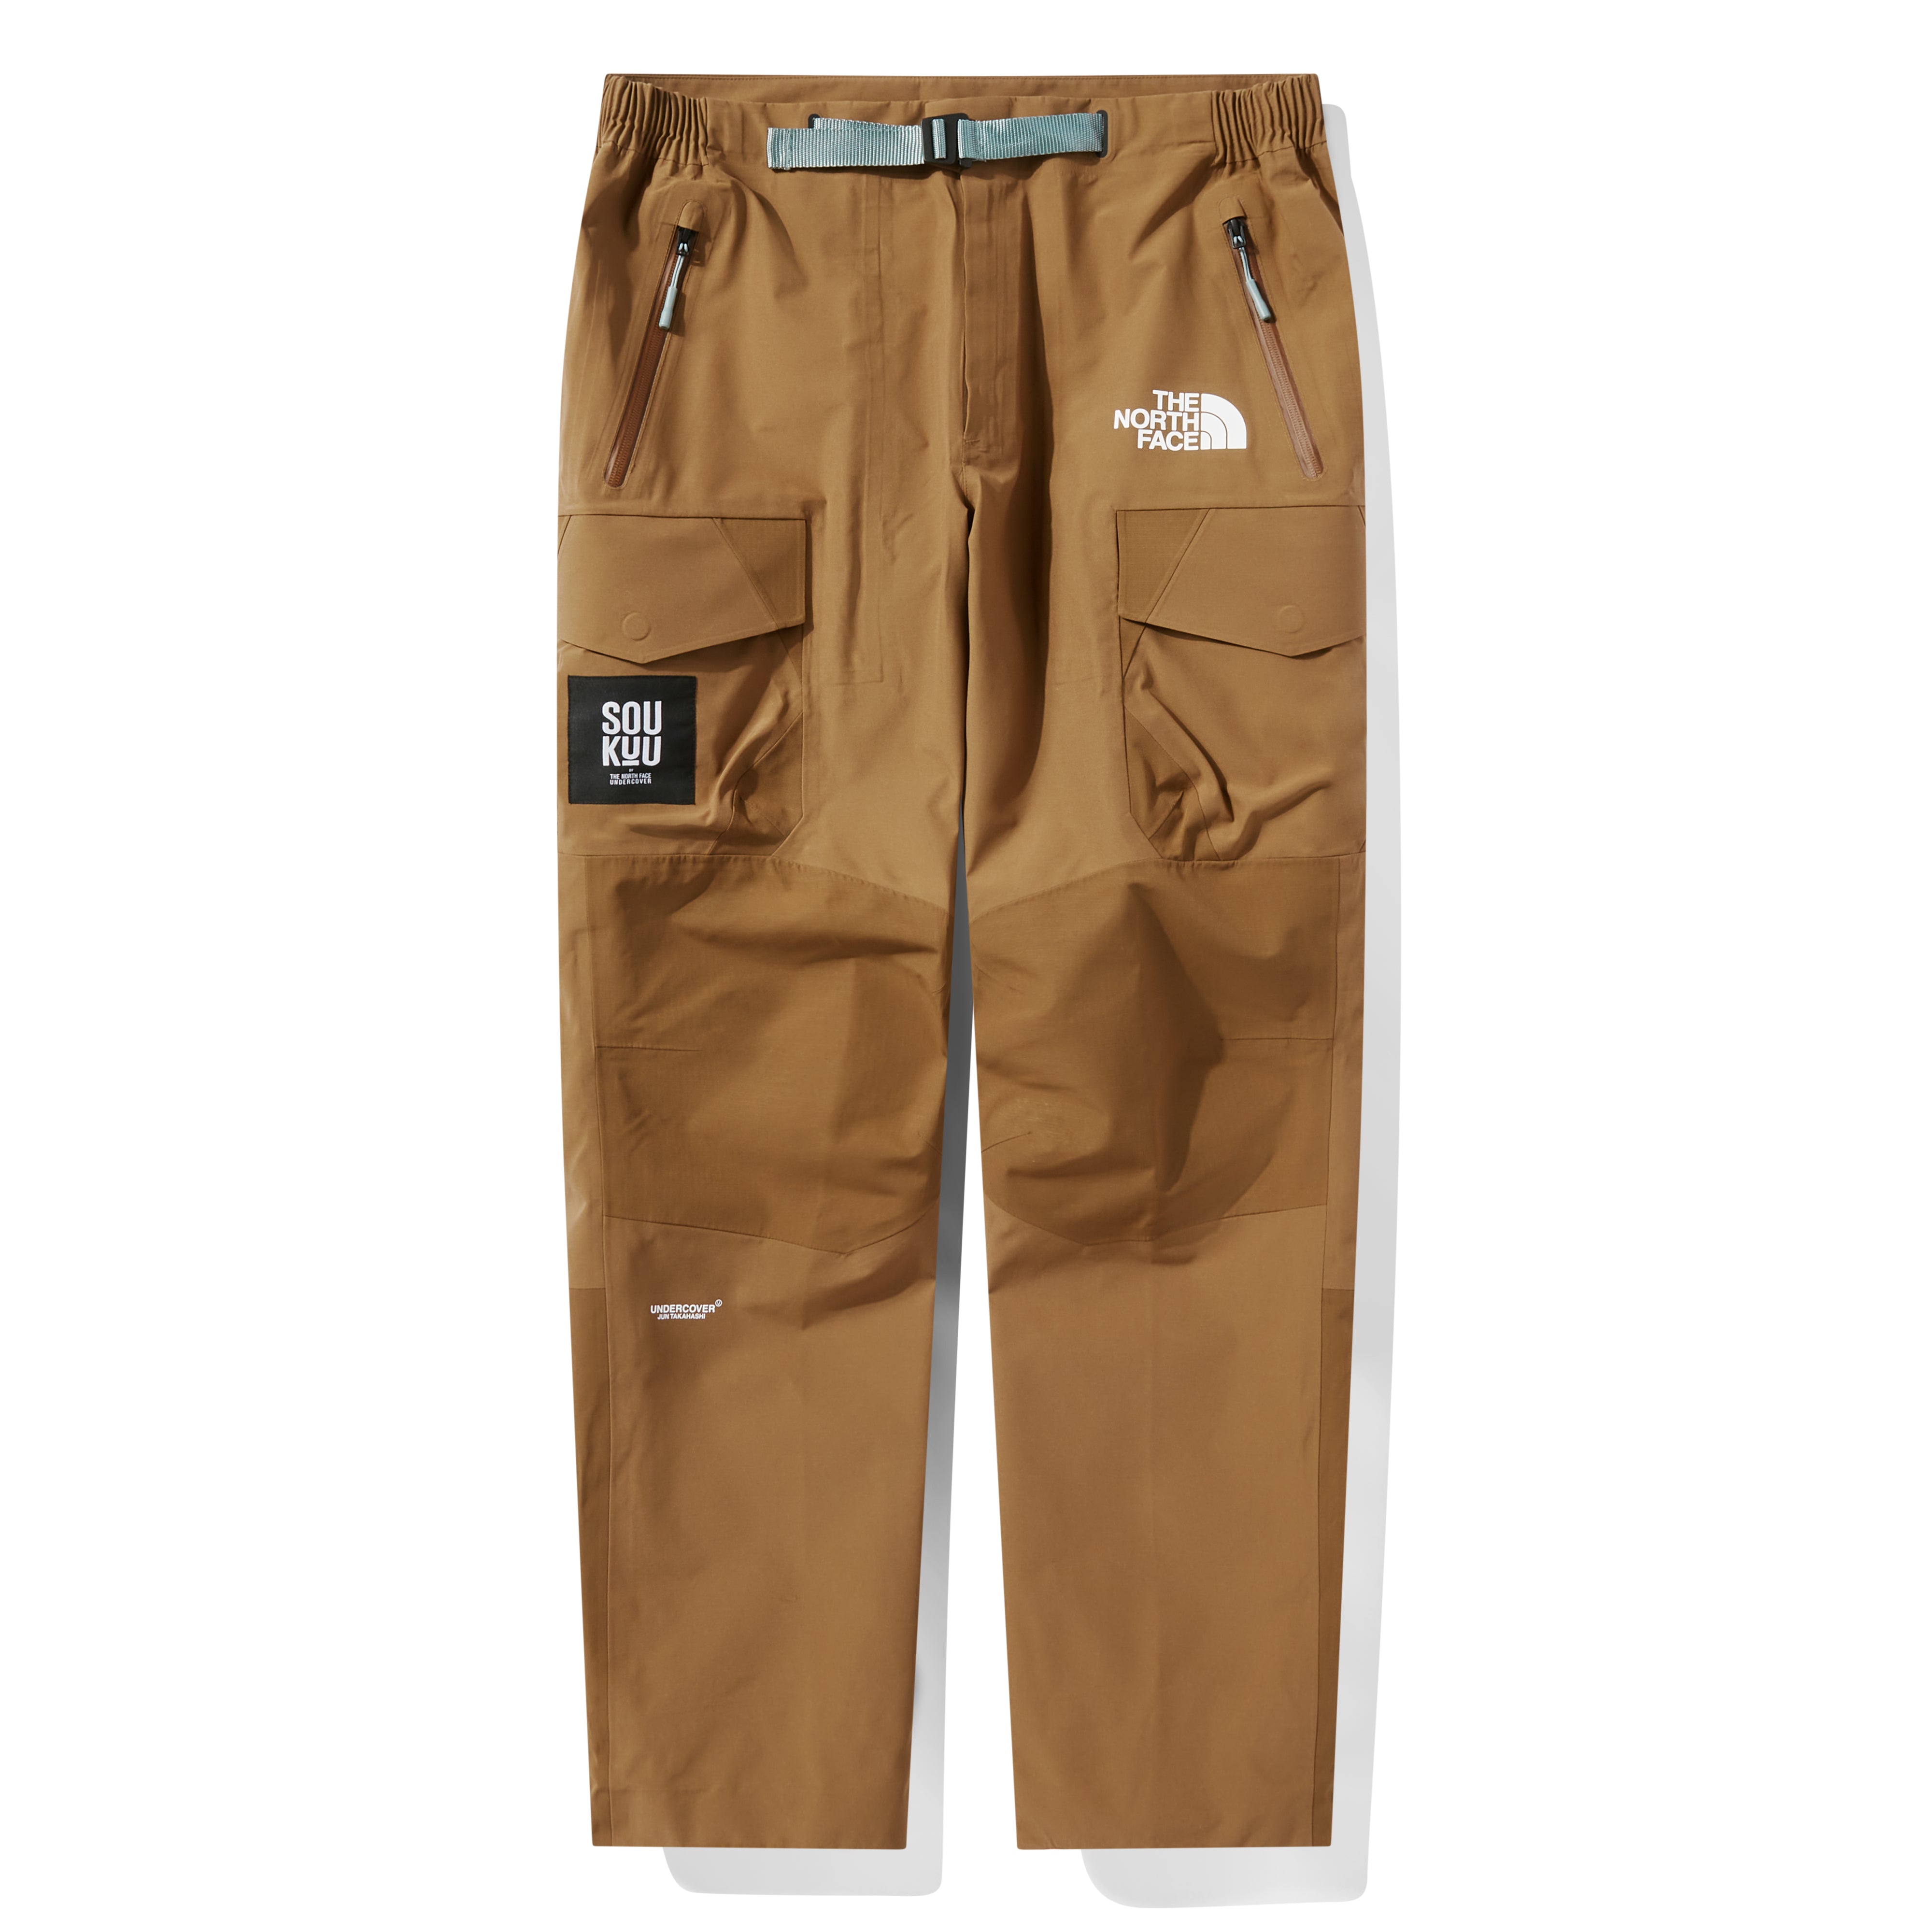 The North Face - Undercover Soukuu Geodesic Shell Pant - (Sepia 